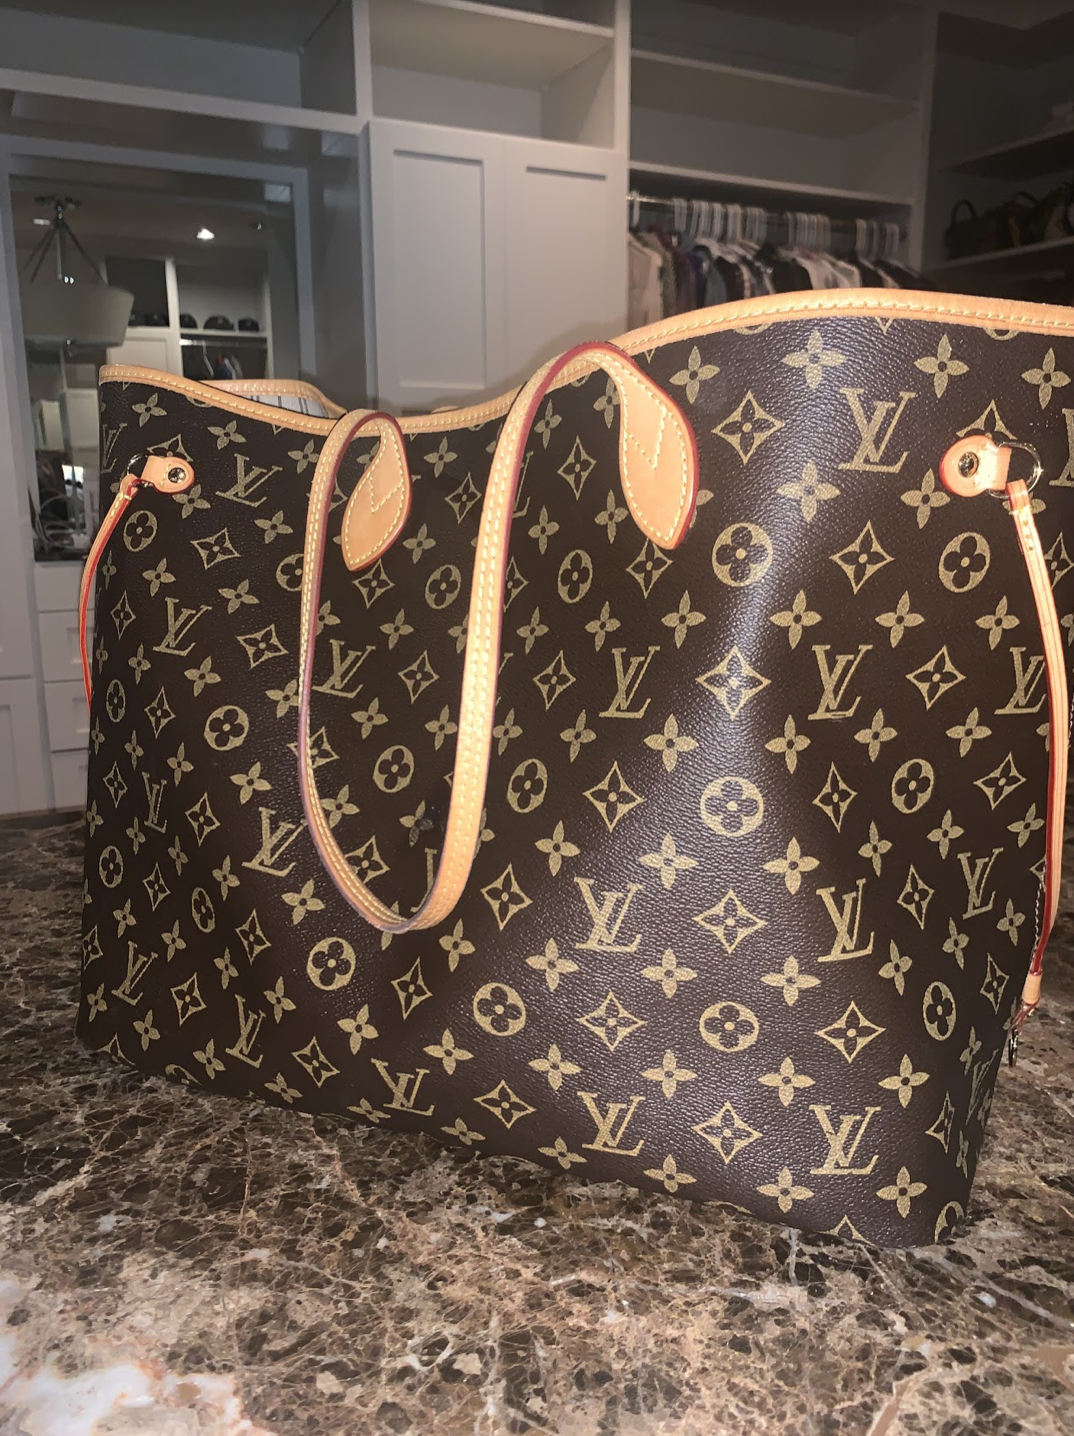 Do you think it is wrong for Louis Vuitton to burn their unsold